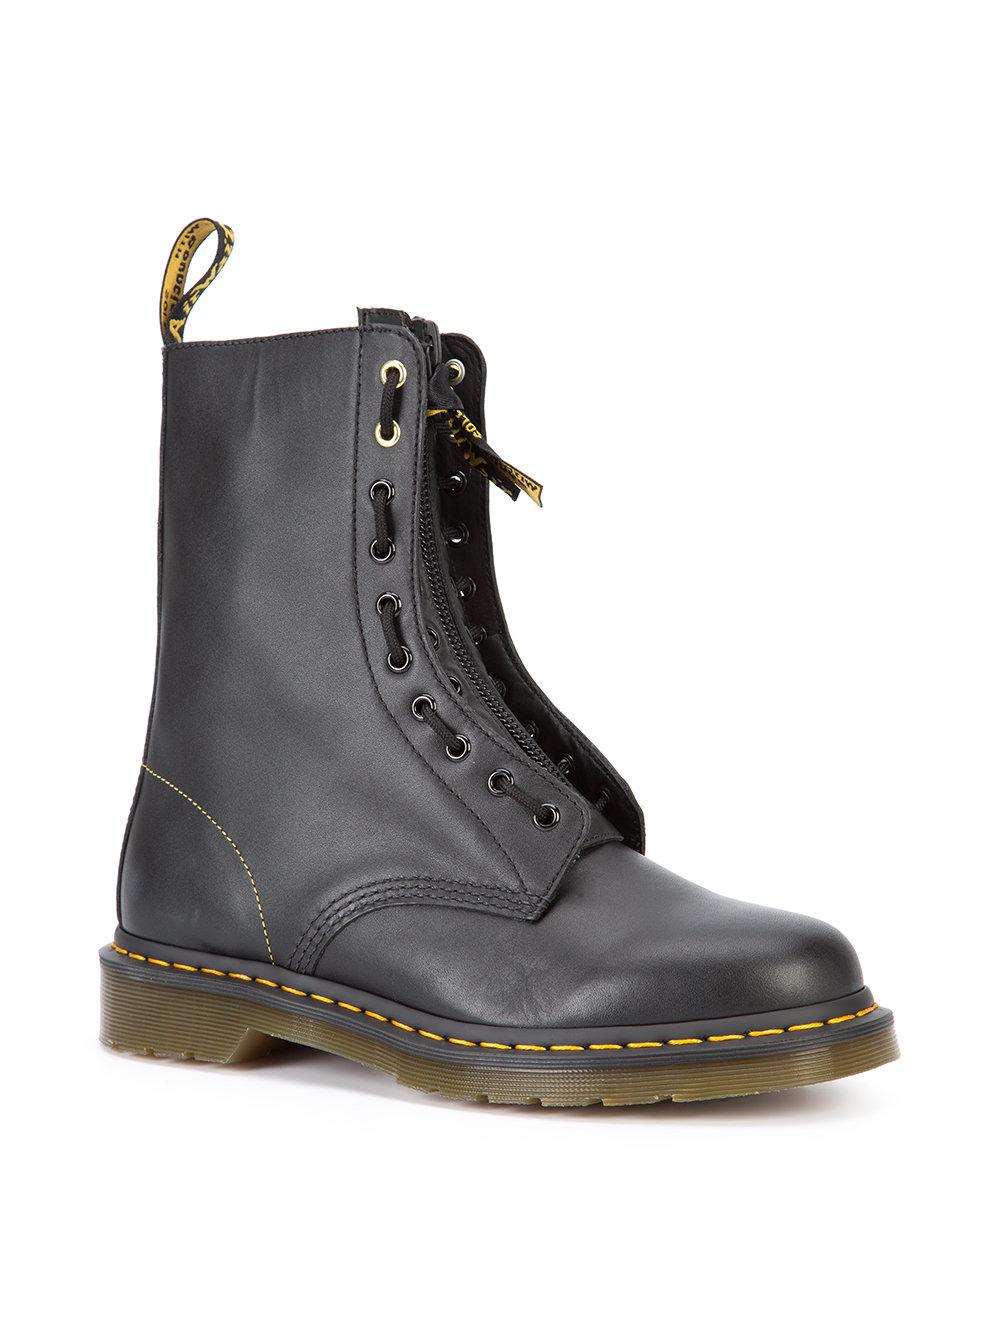 Yohji Yamamoto Leather Dr. Martens Front Zip Boots in Black for Men - Lyst